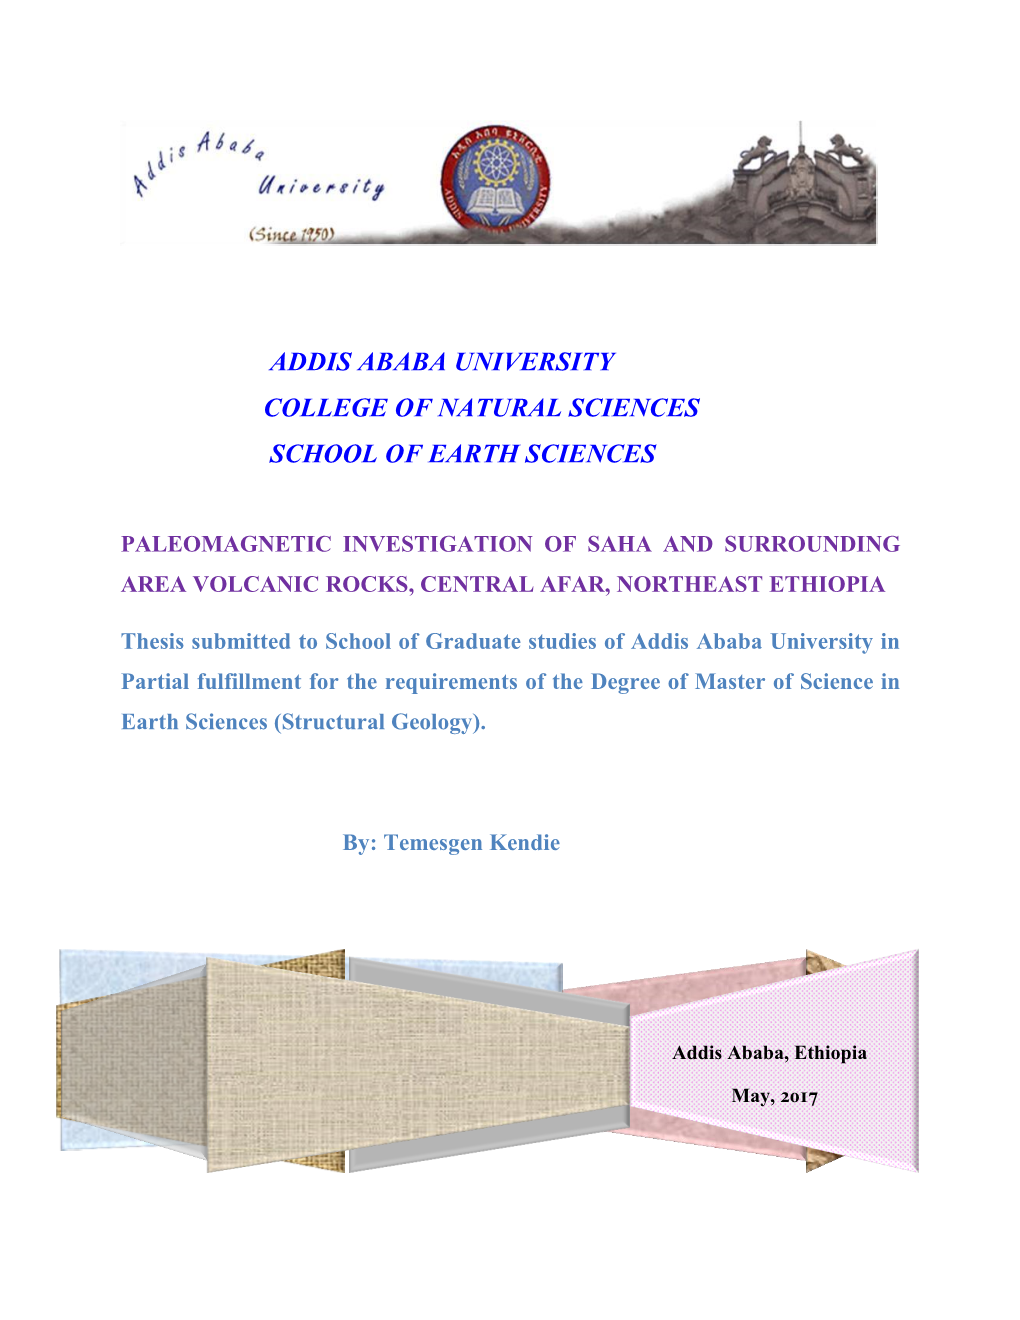 Addis Ababa University College of Natural Sciences School of Earth